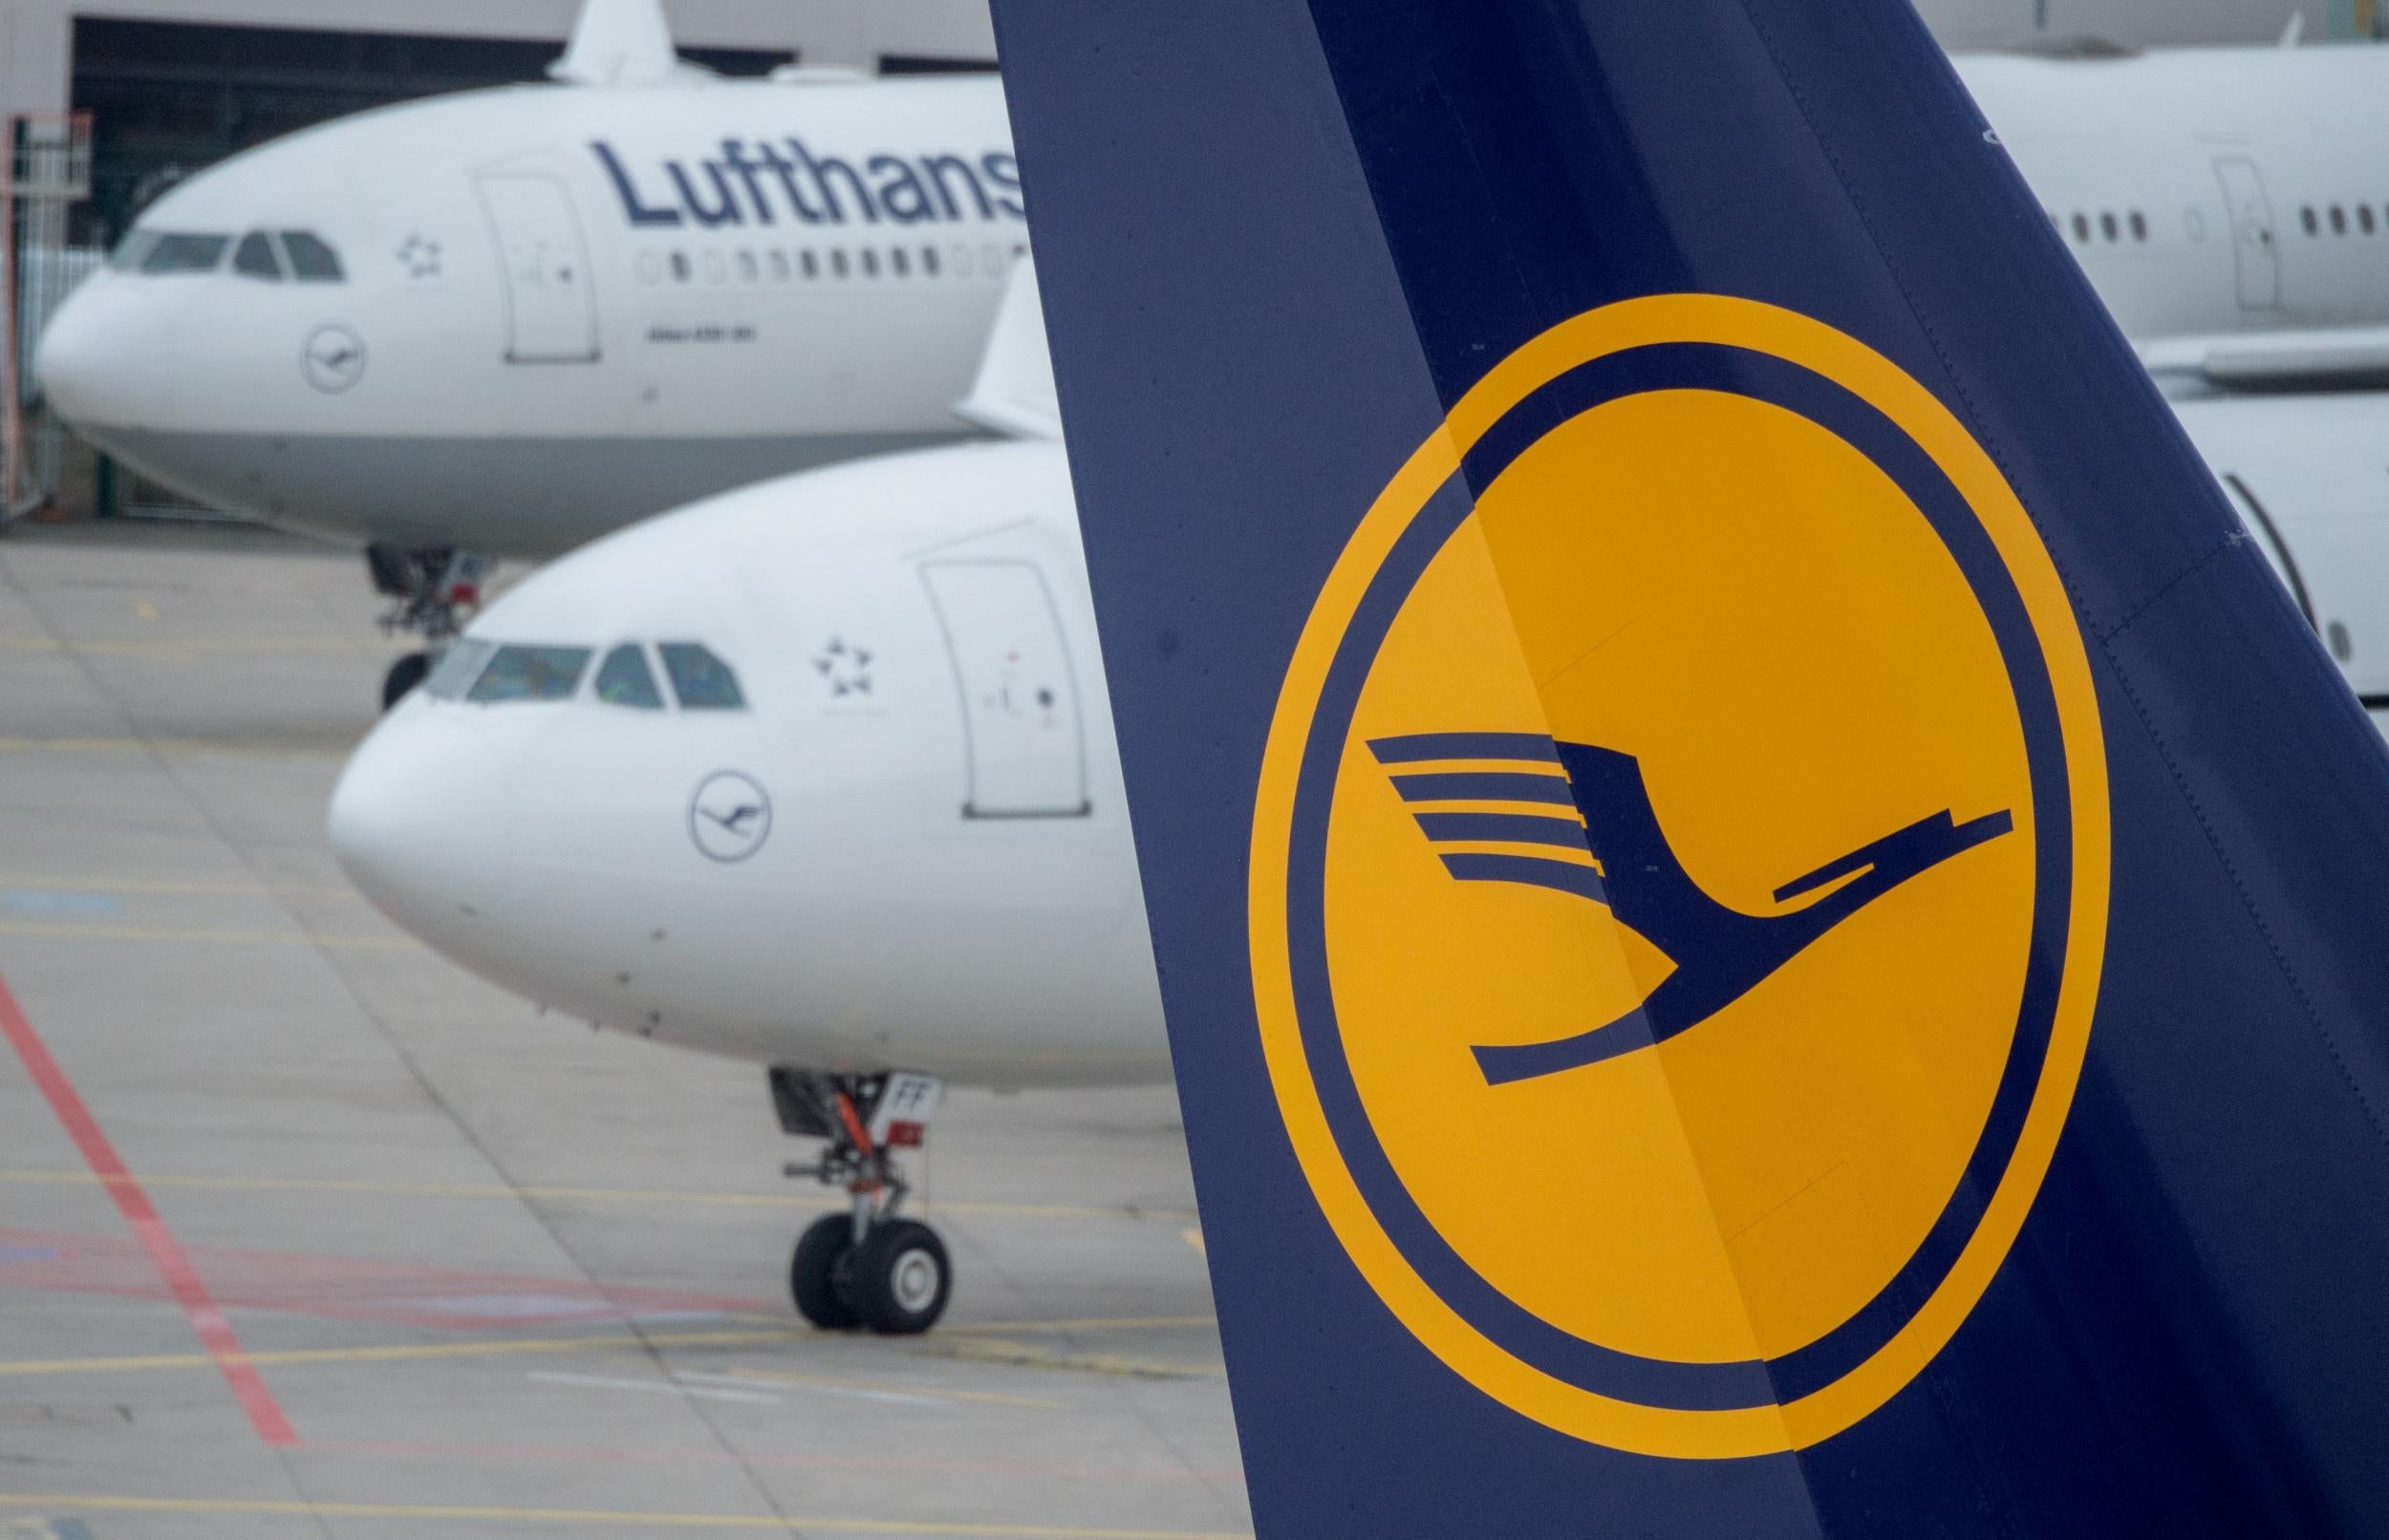 Planes of German airline Lufthansa are being parked